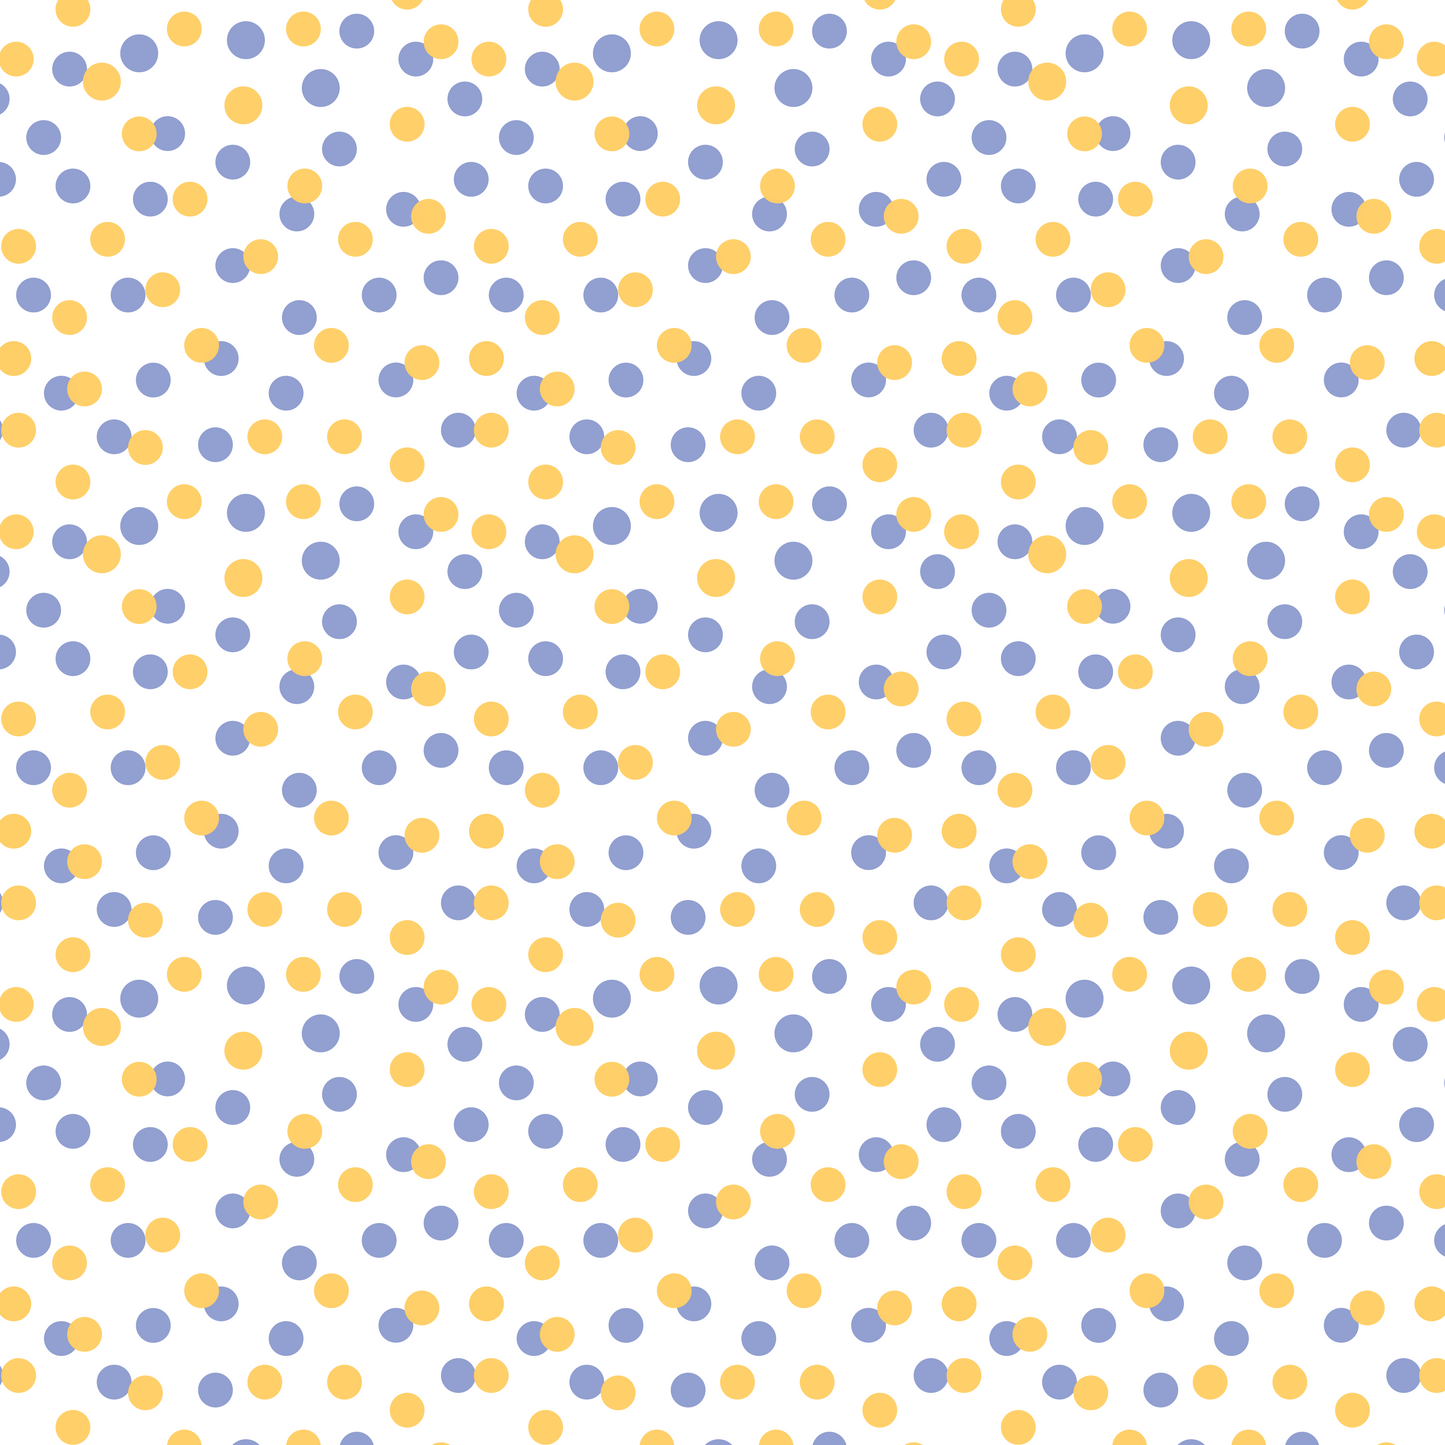 I Love Bees - Blue and Yellow Dots 004